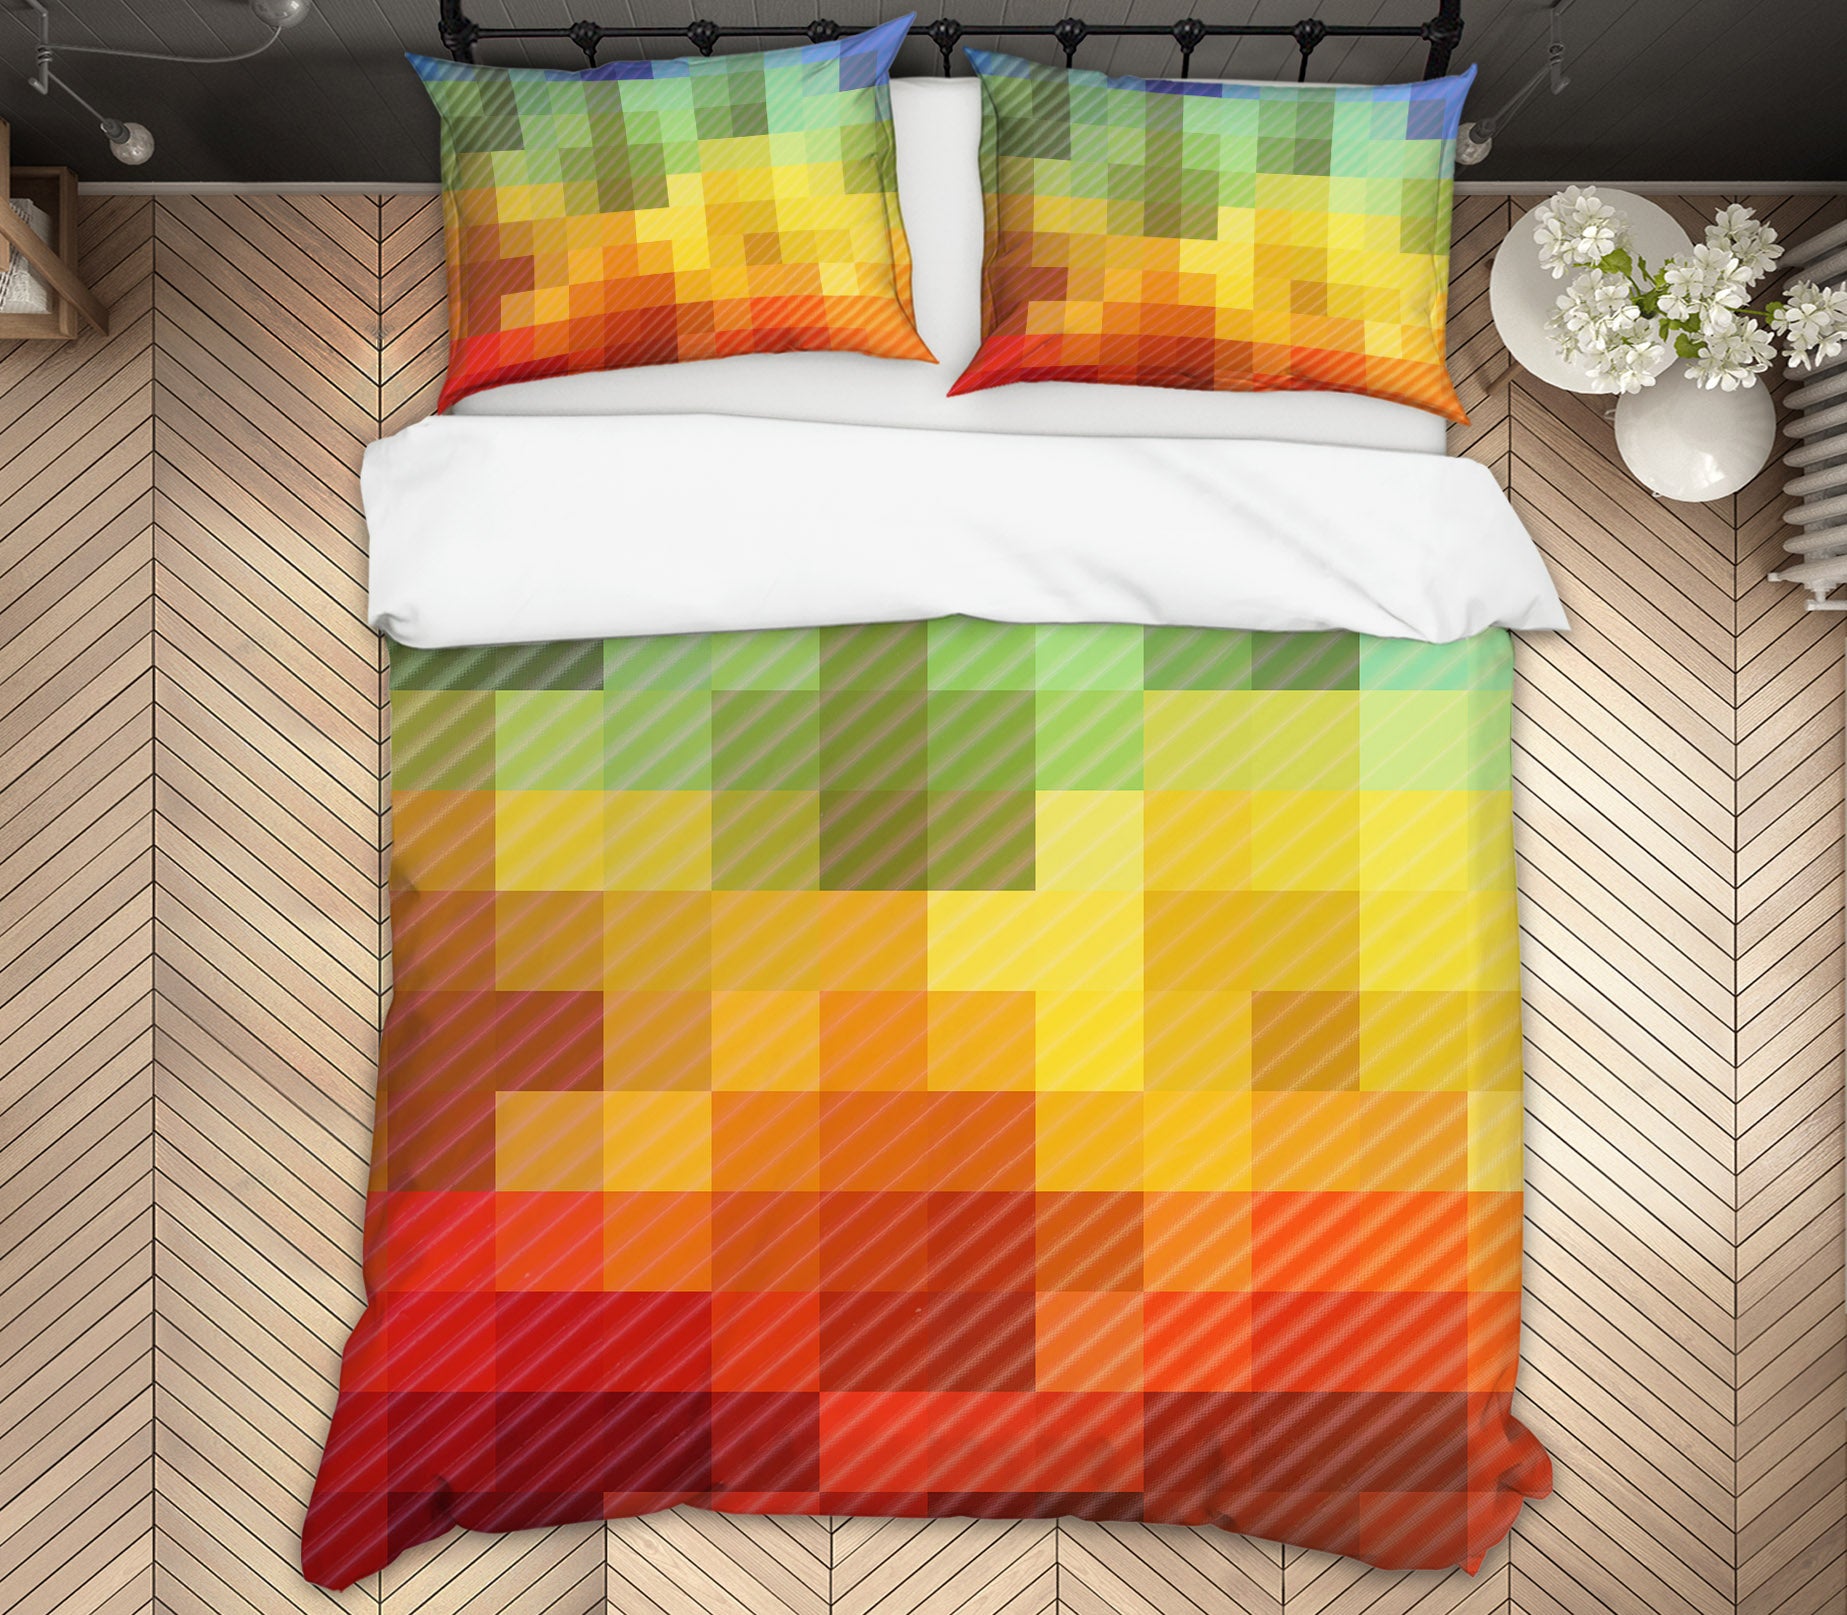 3D Color Mosaic 19129 Shandra Smith Bedding Bed Pillowcases Quilt